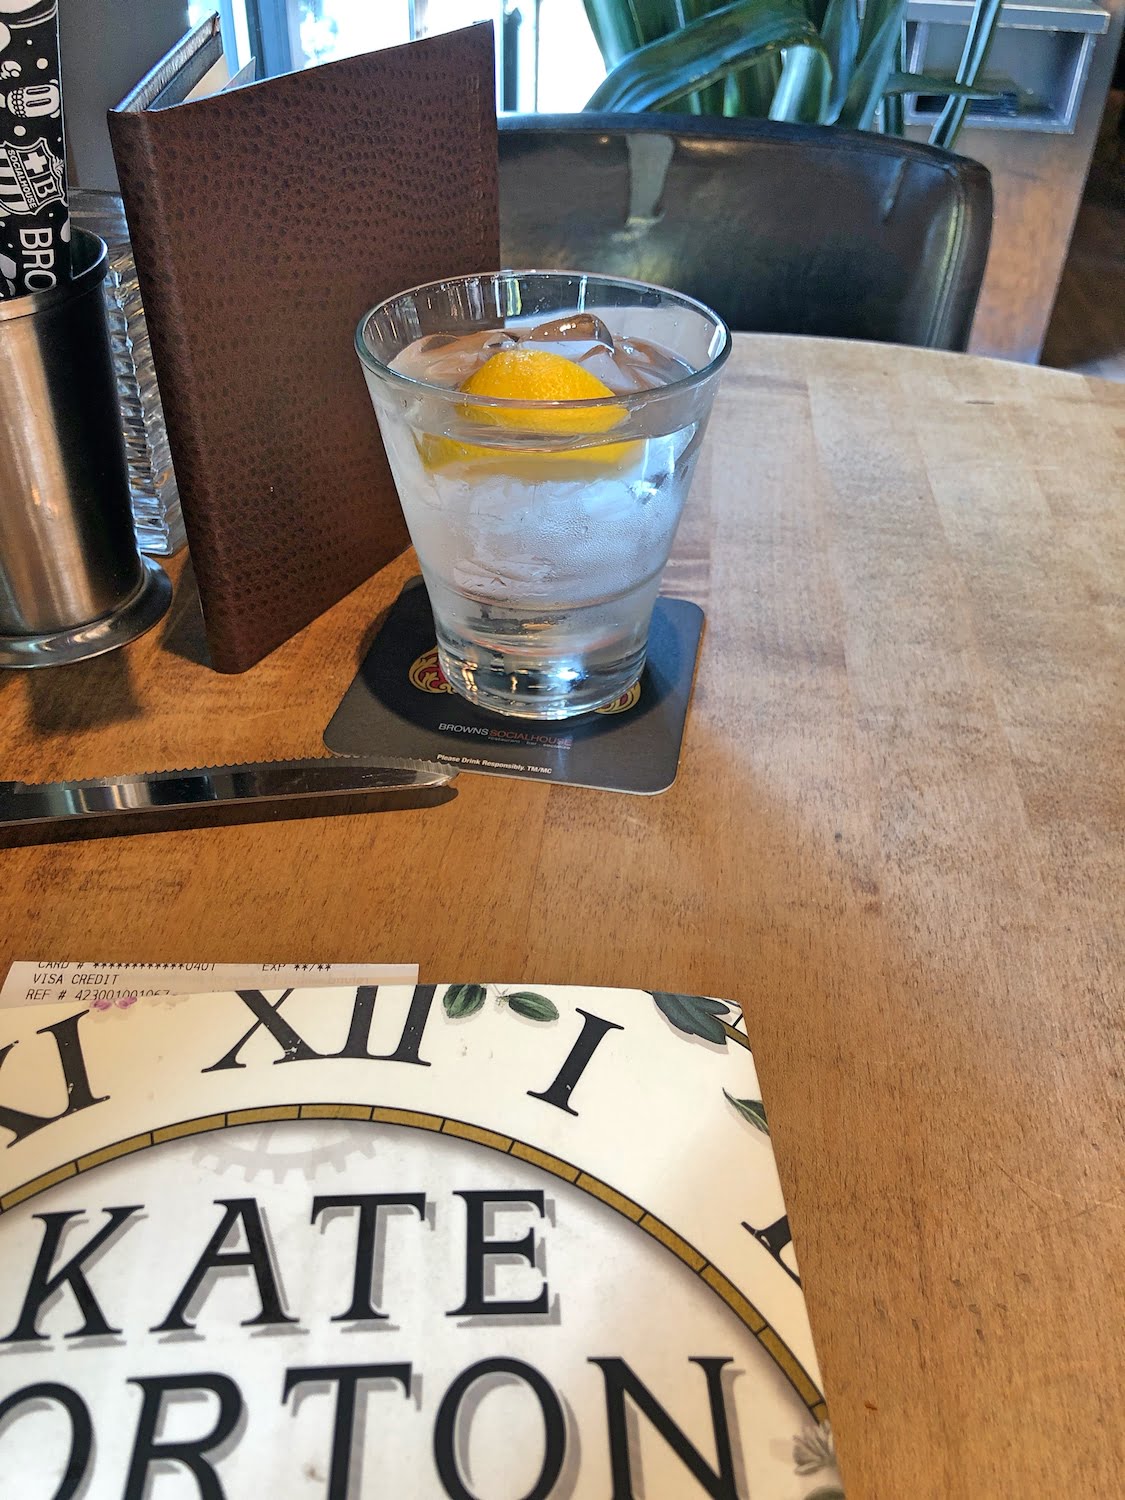 Book and Drink on Table at Restaurant